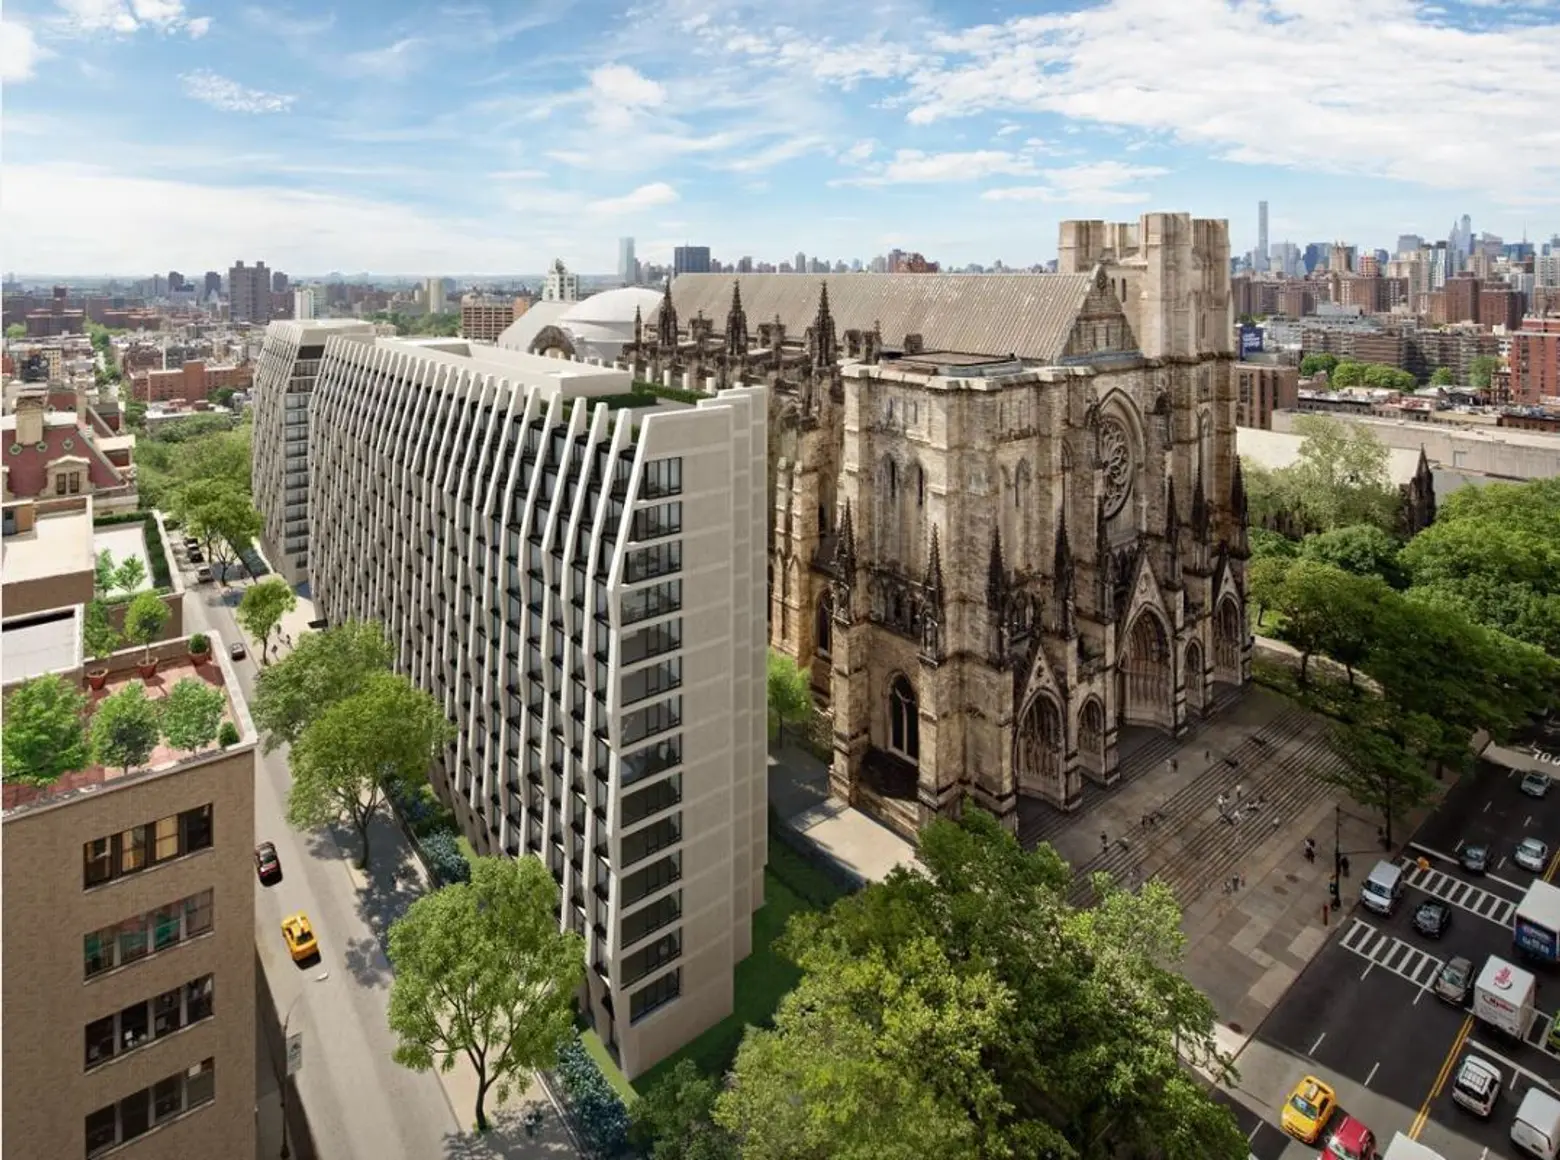 Apply Today for an $827/Month Apartment at the Controversial Towers Next to St. John the Divine